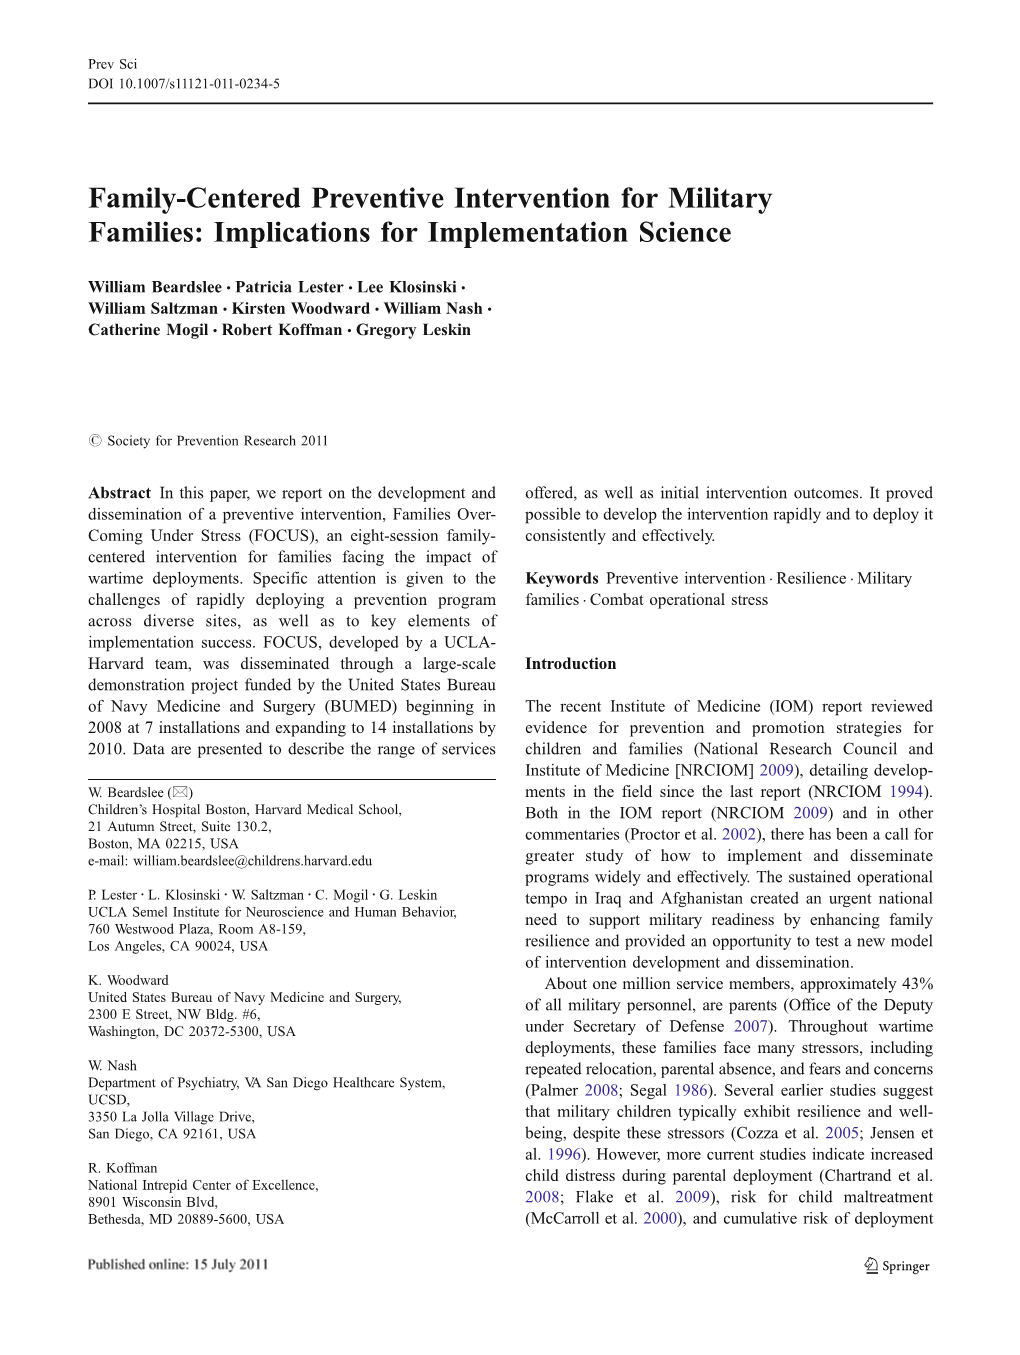 Family-Centered Preventive Intervention for Military Families: Implications for Implementation Science